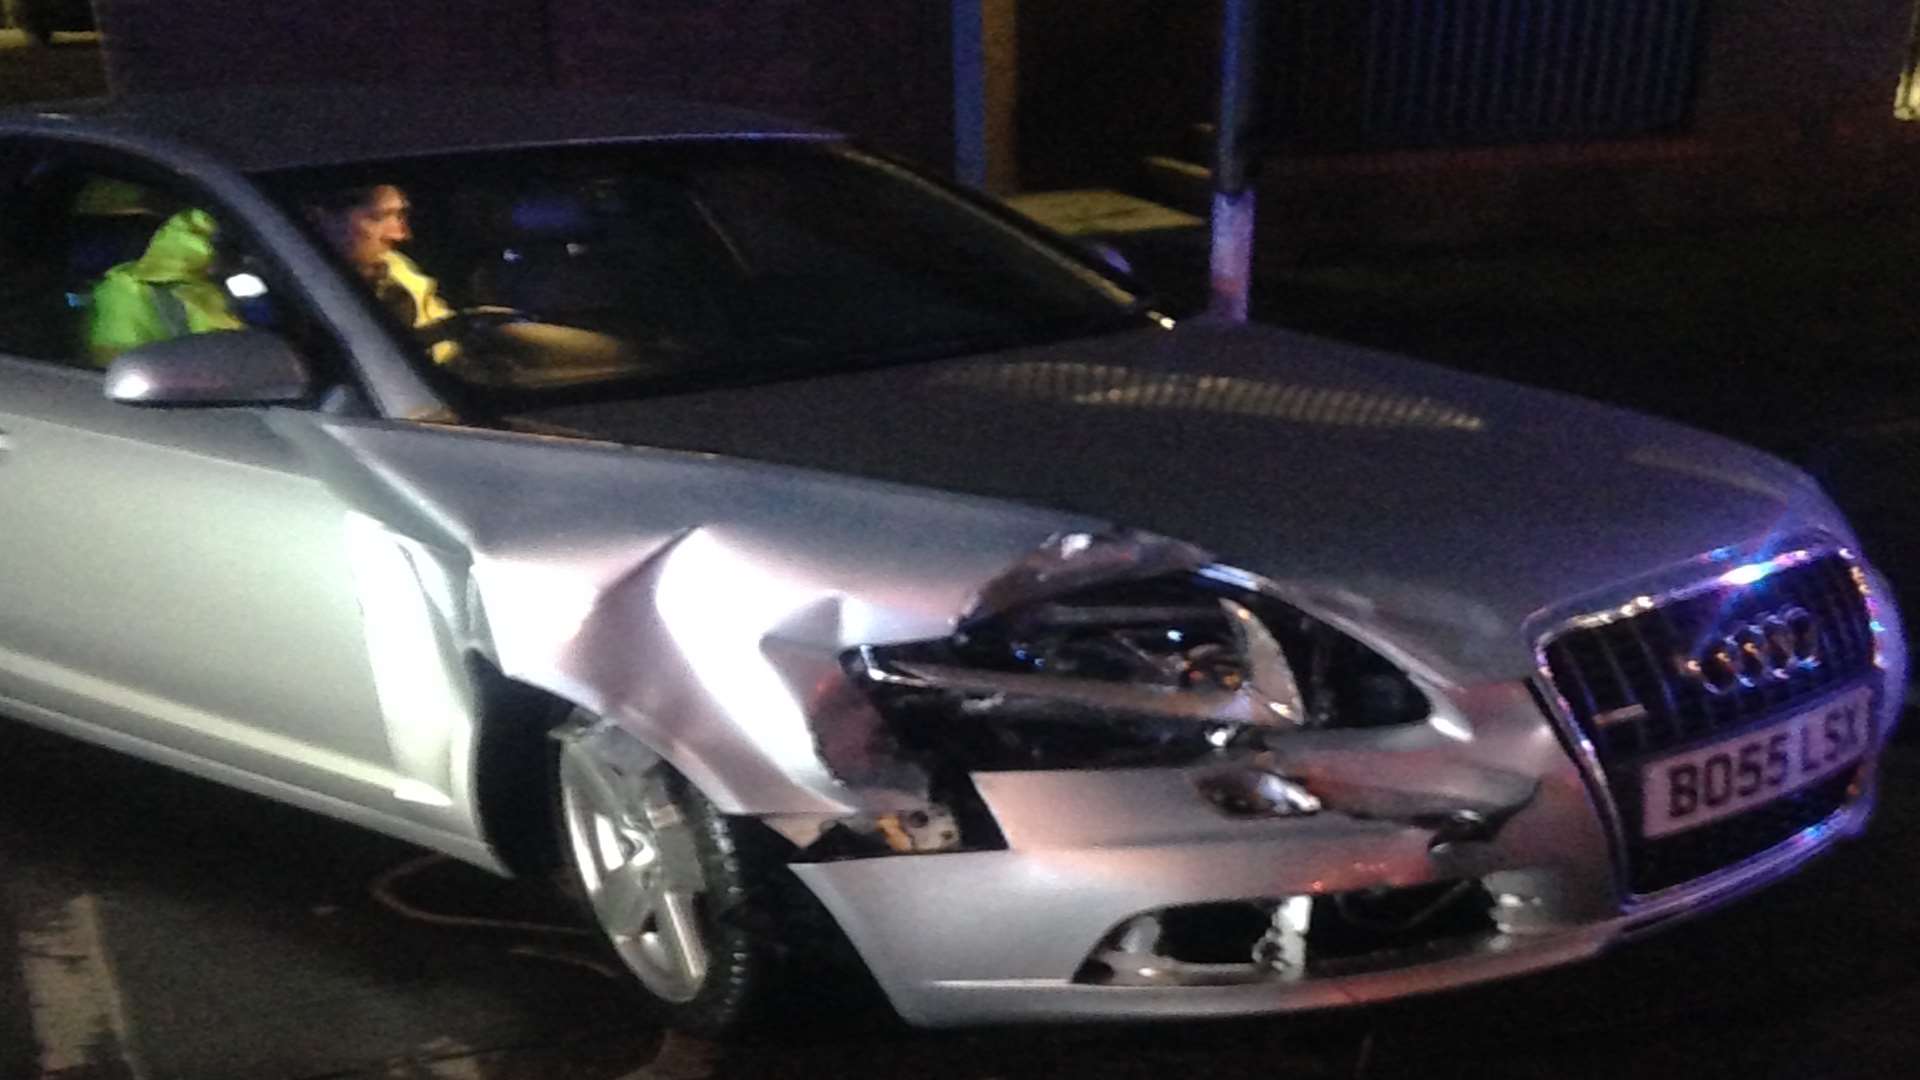 A silver Audi was one of the vehicles involved in the accident